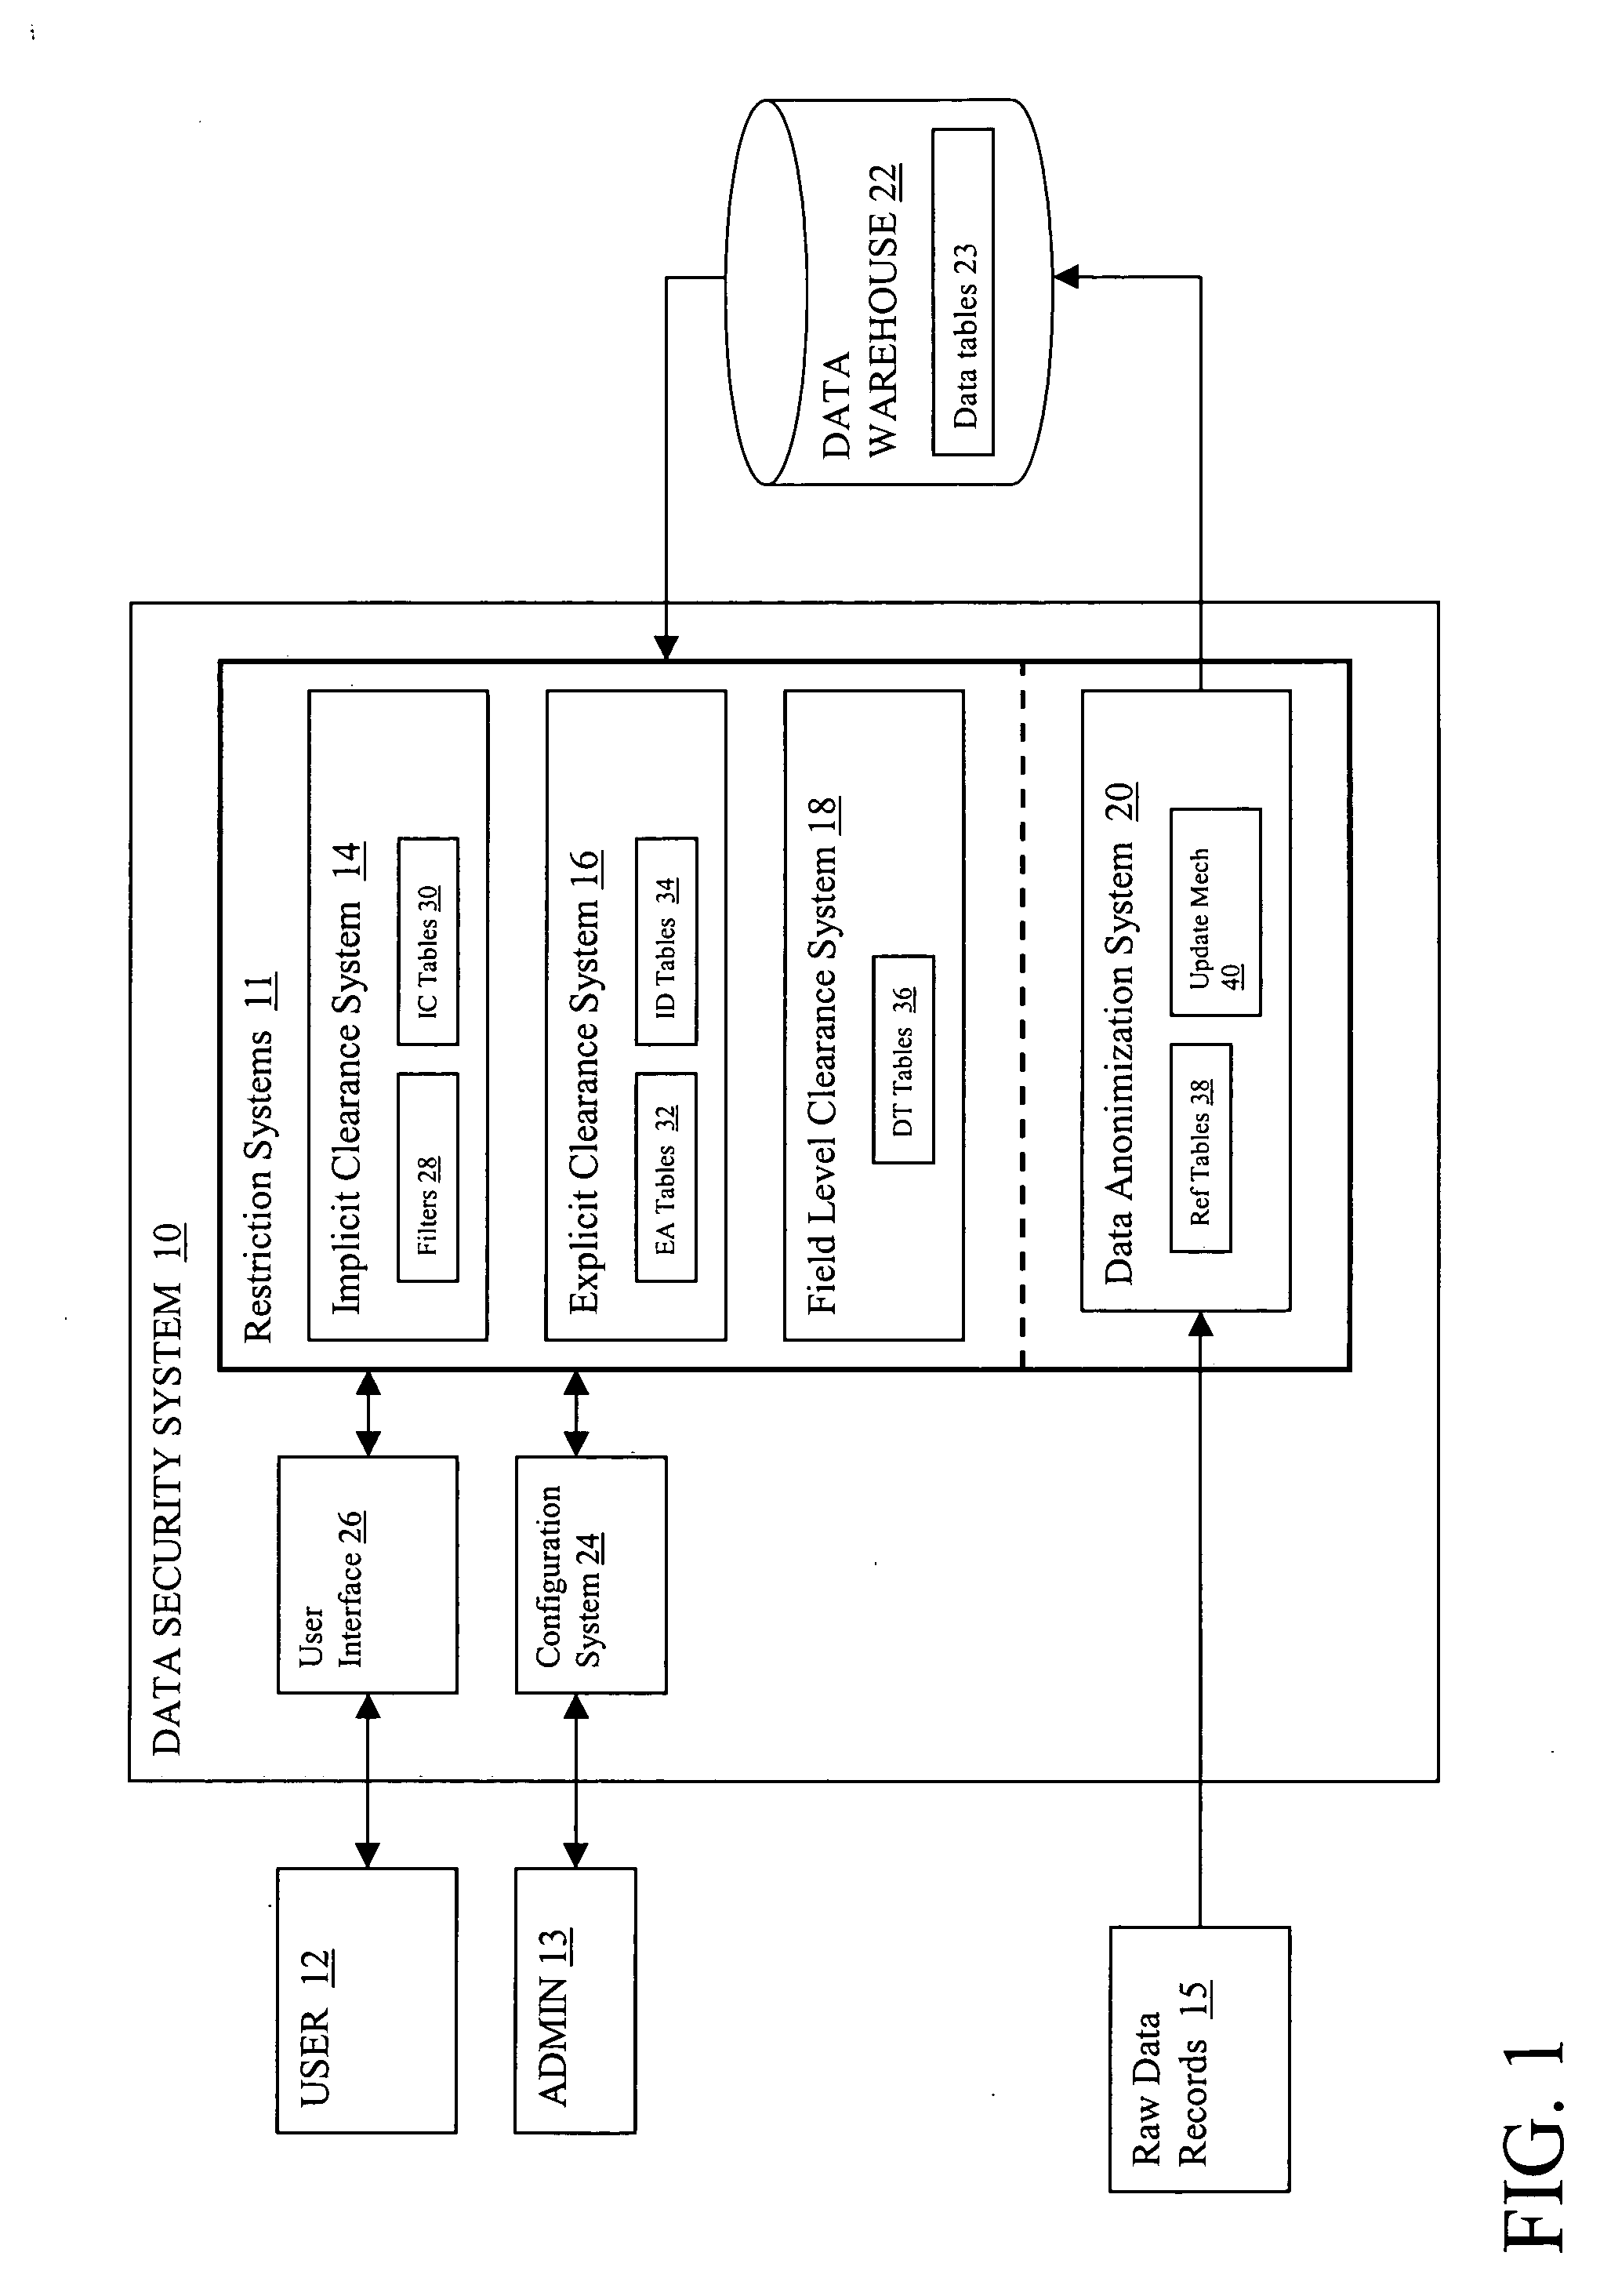 System and method for providing data security